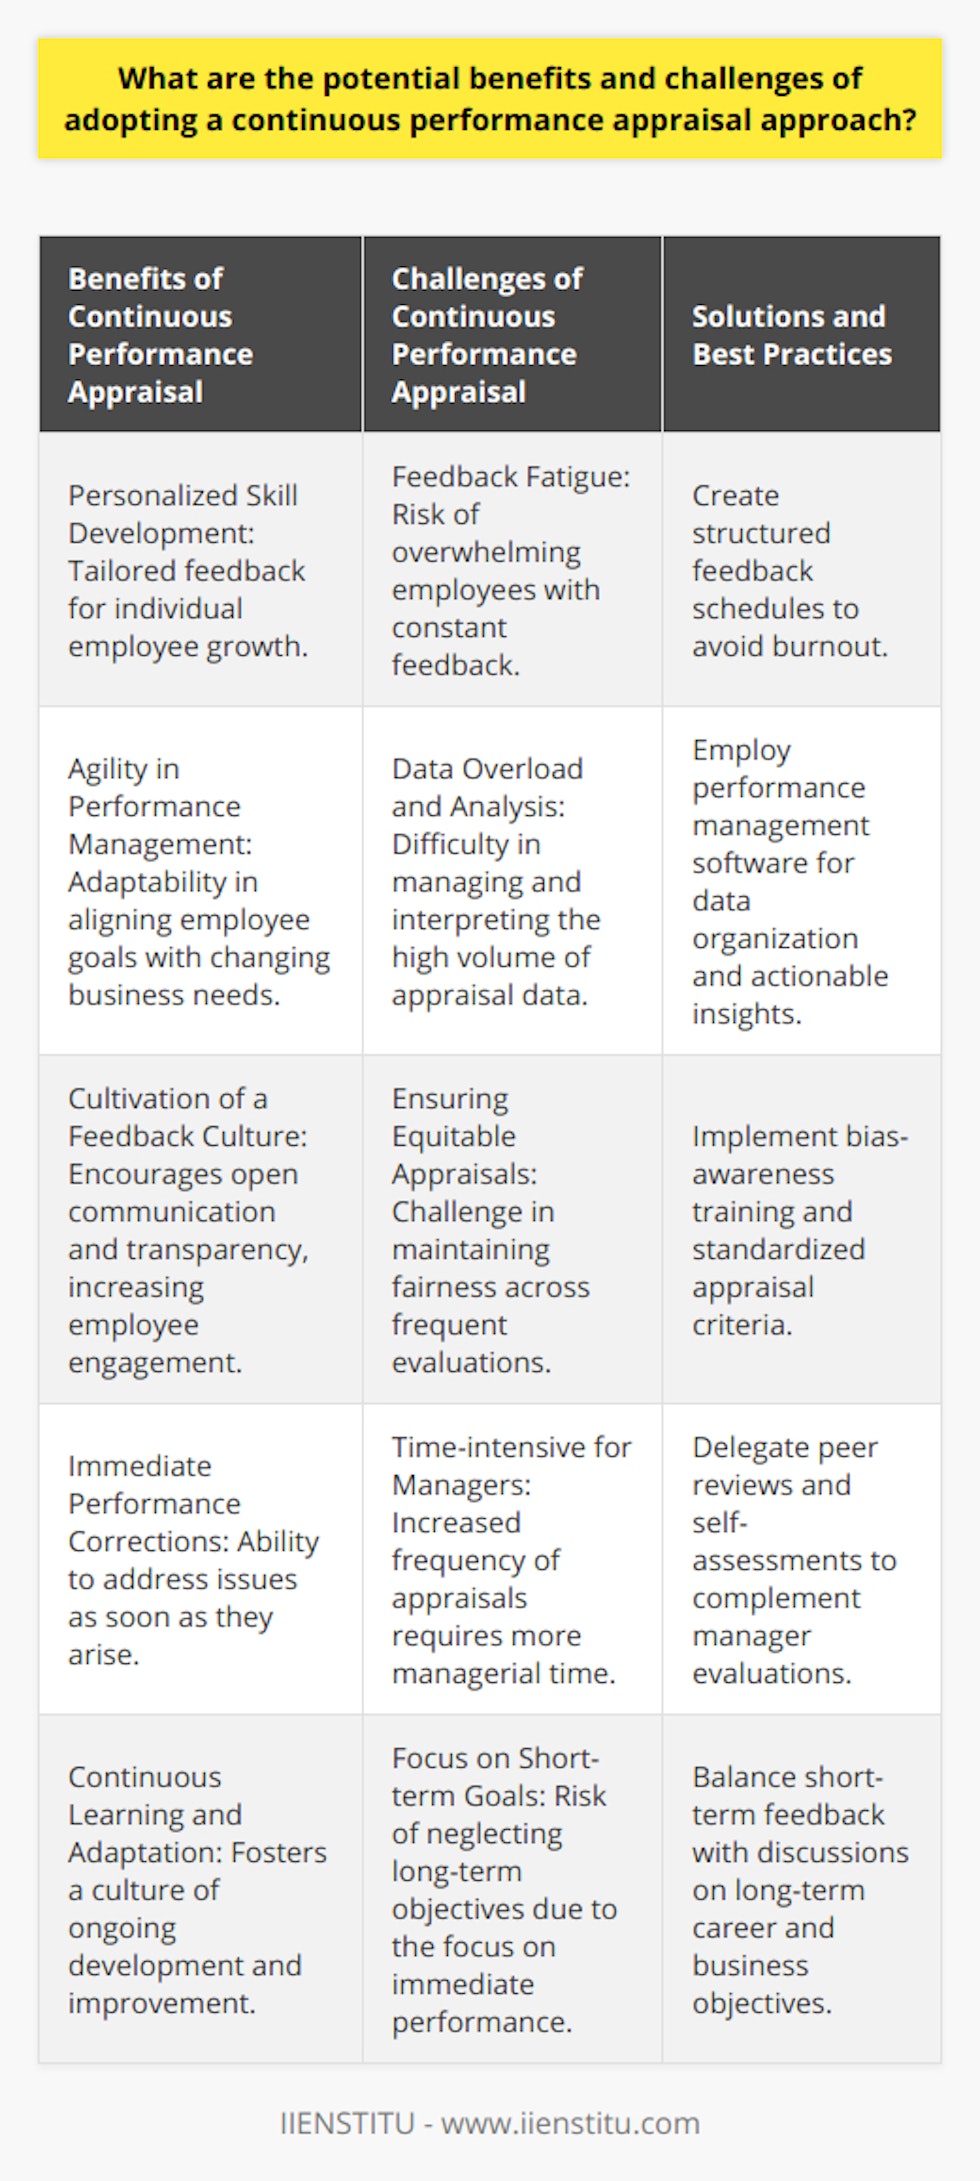 The continuous performance appraisal system is an innovative approach toward employee evaluation that moves away from the traditional annual or bi-annual reviews to a more fluid and regular process. Below, we explore the benefits and challenges associated with its adoption by businesses.**Potential Benefits of Continuous Performance Appraisal**1. **Personalized Skill Development:**Frequent engagement between employees and managers allows for more personalized employee development. Gaps in skills or knowledge can be addressed swiftly, tailored to individual needs, and measured regularly to ensure progress.2. **Agility in Performance Management:**Continuous appraisal systems are adaptable; they allow for quick pivoting and recalibrating of employee goals in response to changes in business strategy or external factors. This can ensure that the company and its workforce remain aligned with the evolving market demands.3. **Cultivation of a Feedback Culture:**A culture of regular, constructive feedback can be fostered with continuous appraisals. This facilitates open communication and transparency and can lead to employees feeling more valued and understood by their organization.**Challenges of Continuous Performance Appraisal**1. **Feedback Fatigue:**With continuous feedback comes the potential for employees to become overwhelmed or desensitized to the feedback they receive. This may lead to demotivation or disregard for the appraisal process if not managed sensitively.2. **Data Overload and Analysis:**Continuous appraisal systems generate vast amounts of data that require analysis and interpretation. Without the right tools or training, this data can be burdensome and may lead to misinformed decisions.3. **Ensuring Equitable Appraisals:**Equal treatment during evaluations can be challenging when appraising employees continuously. Managers may inadvertently favor those more visible or vocal, potentially leading to unequal recognition and reward.In sum, while the continuous performance appraisal system promises more immediate, relevant feedback leading to an engaged and nimble workforce, it also requires thoughtful implementation to overcome challenges related to management time, objective assessment, and preserving a focus on long-term strategic goals. Institutions, such as IIENSTITU, offer resources and learning opportunities that can assist companies in effectively managing these challenges and maximizing the benefits of continuous performance appraisals.